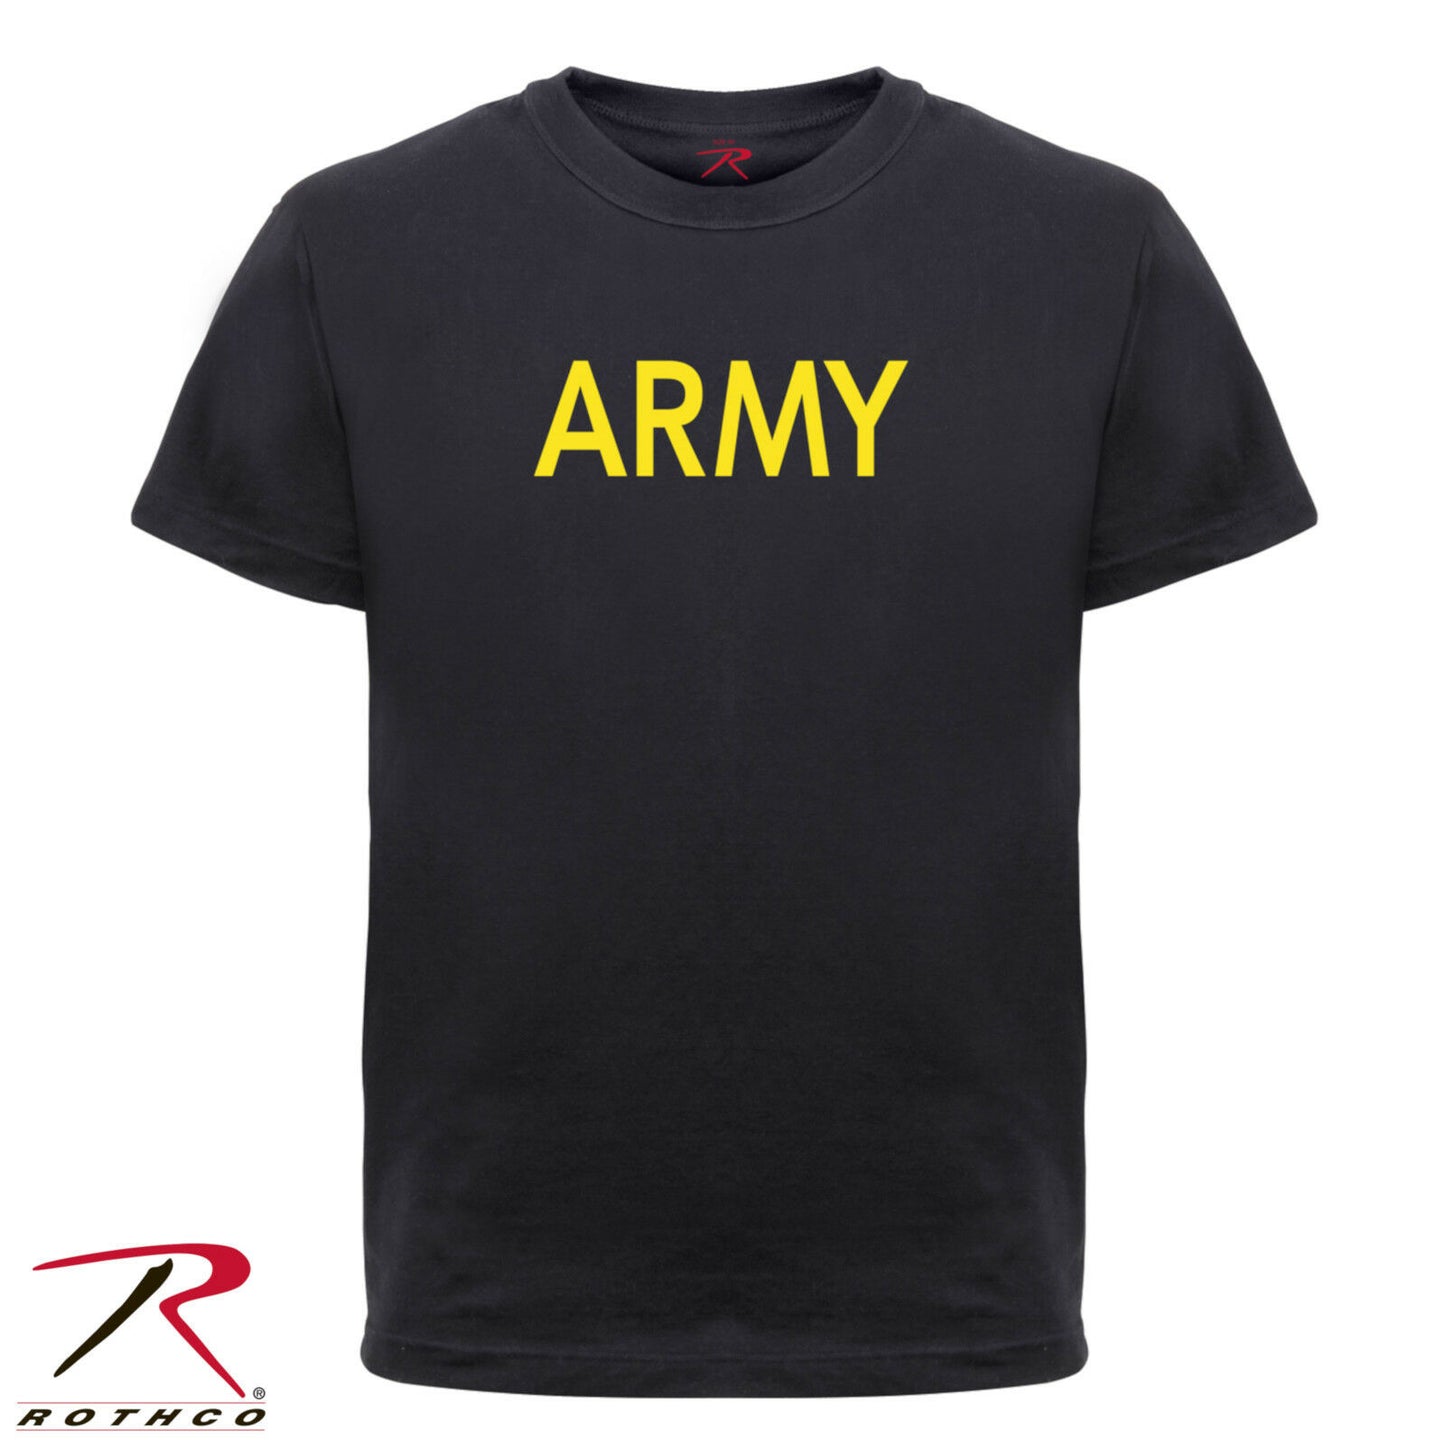 Rothco Kid's Black T-Shirt With Gold ARMY Lettering - ARMY Physical Training Tee